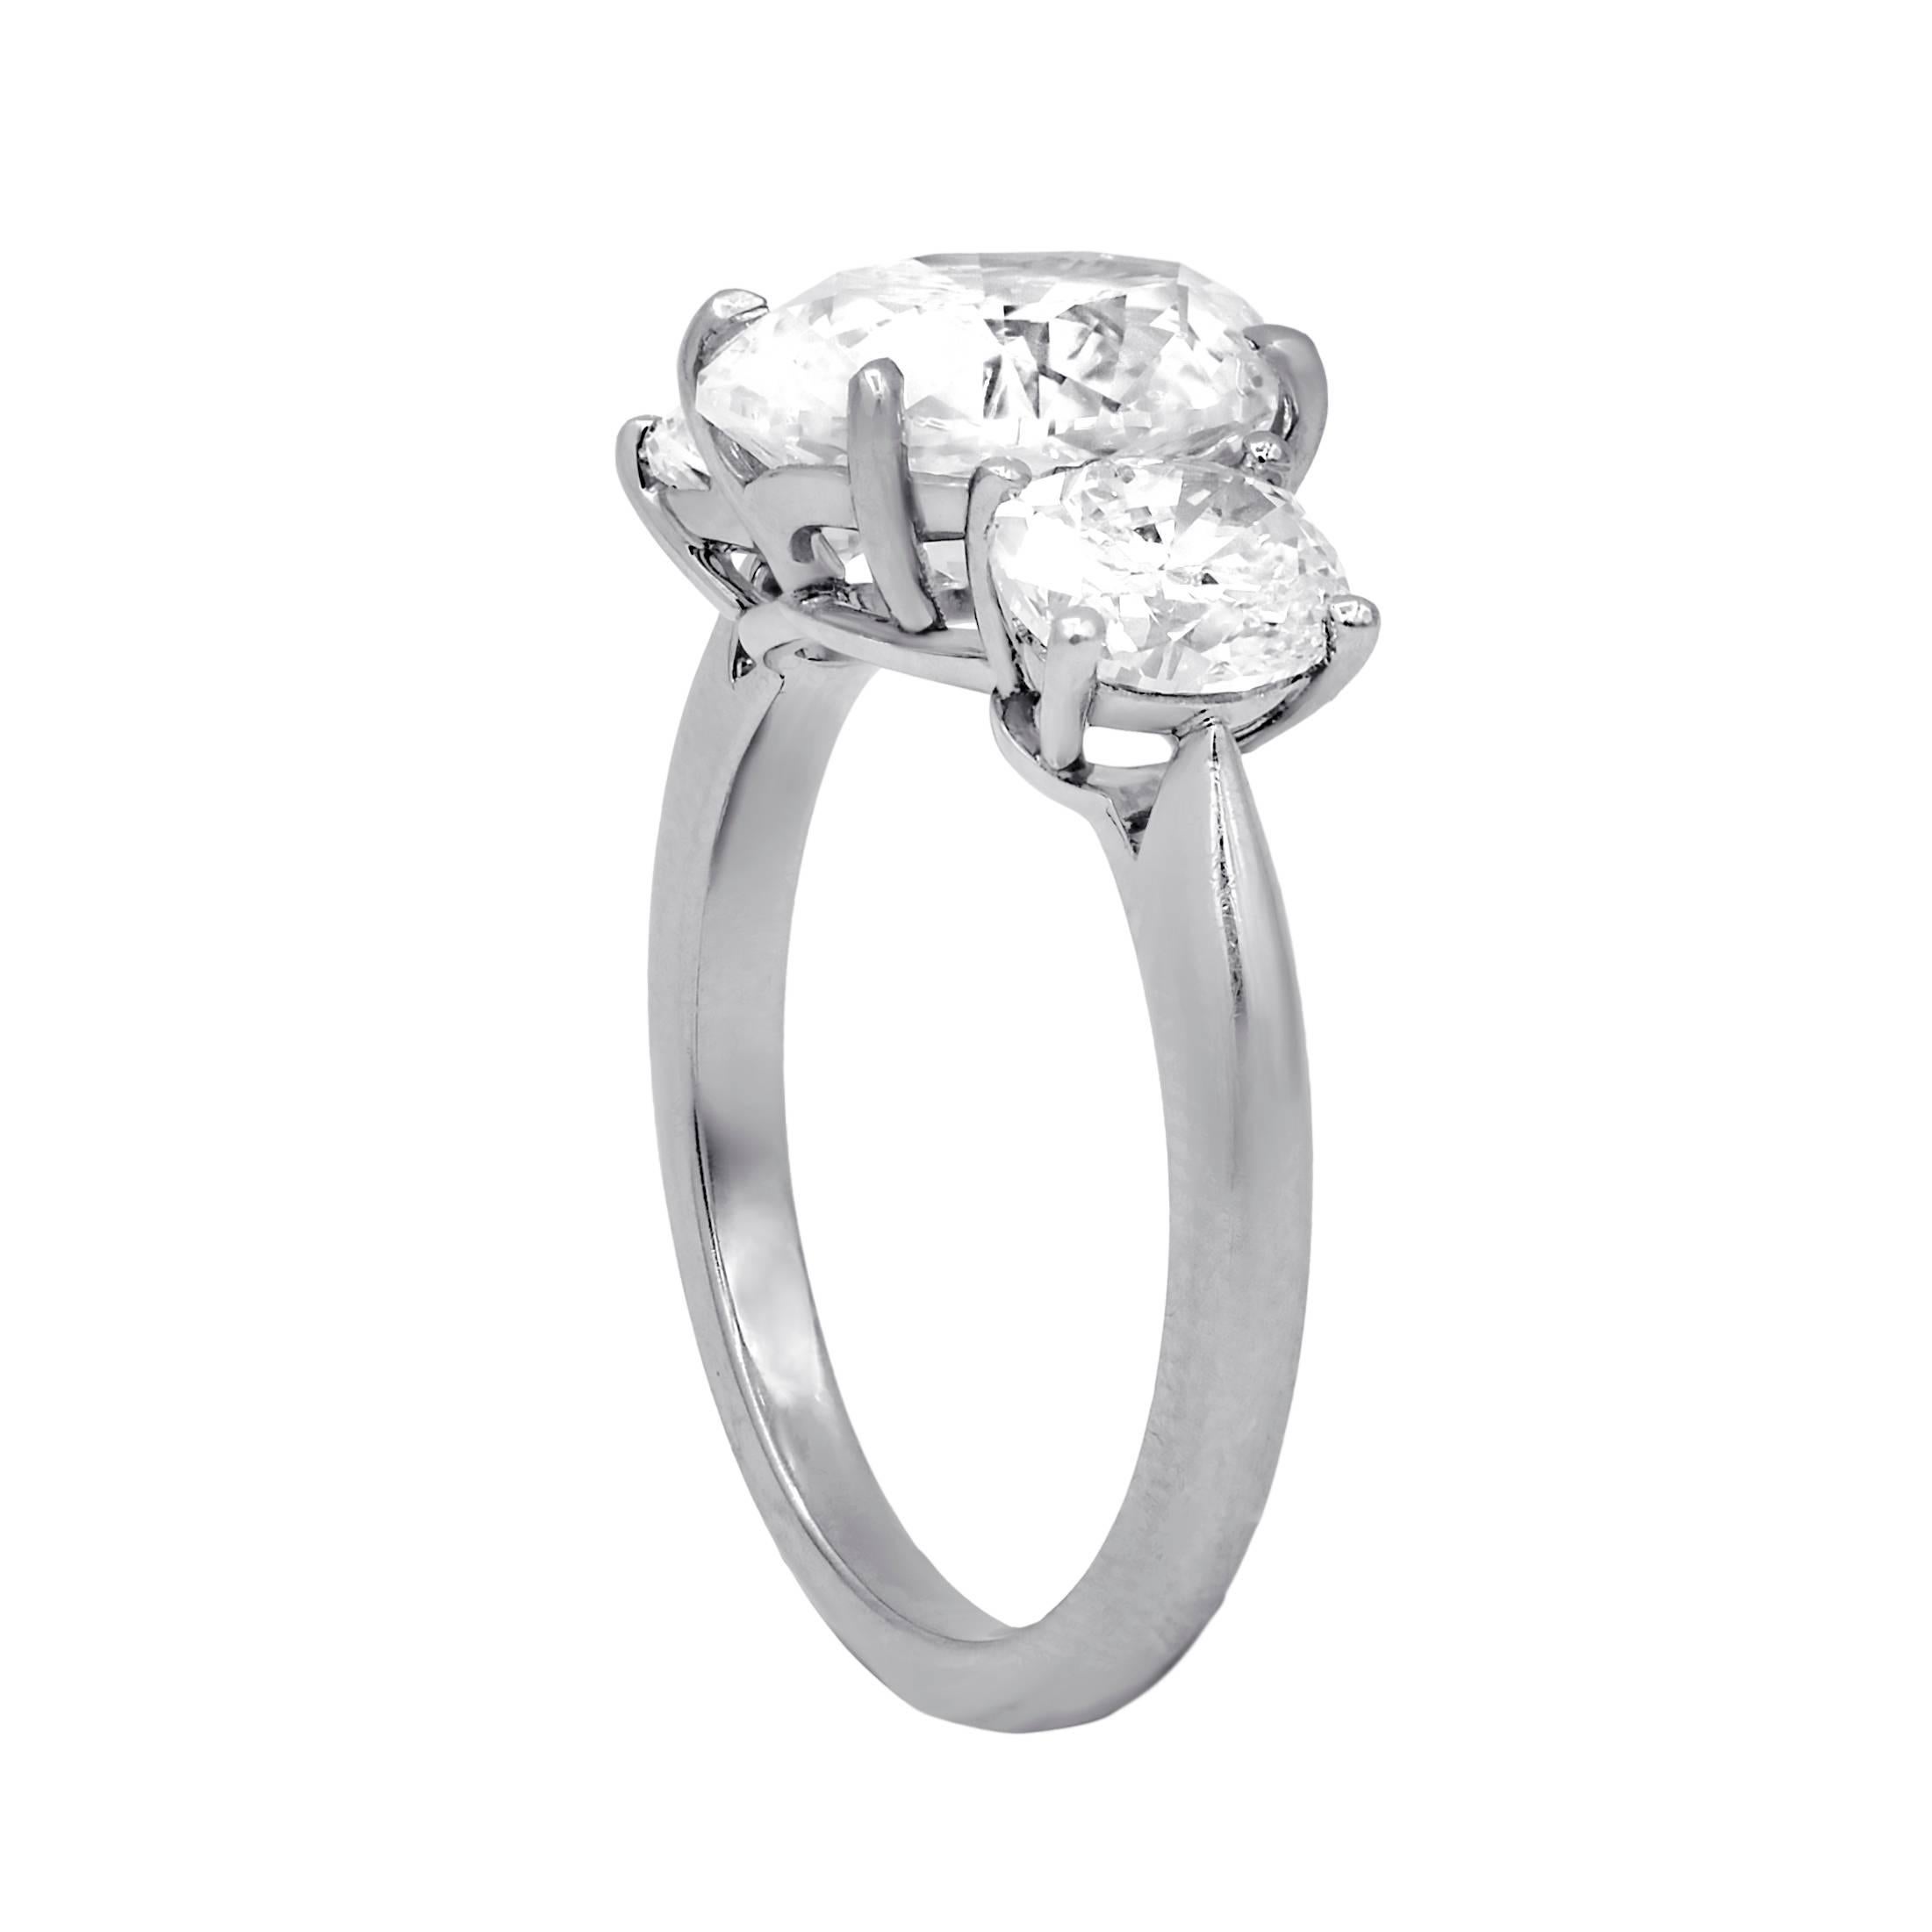 Elegant diamond engagement ring with three oval cut diamonds in platinum mounting.
The center GIA certified oval brilliant cut diamond features 3.26 cts F color/VVS2 clarity and enhanced by two side oval diamonds with 1.54 cts total weight. 

•